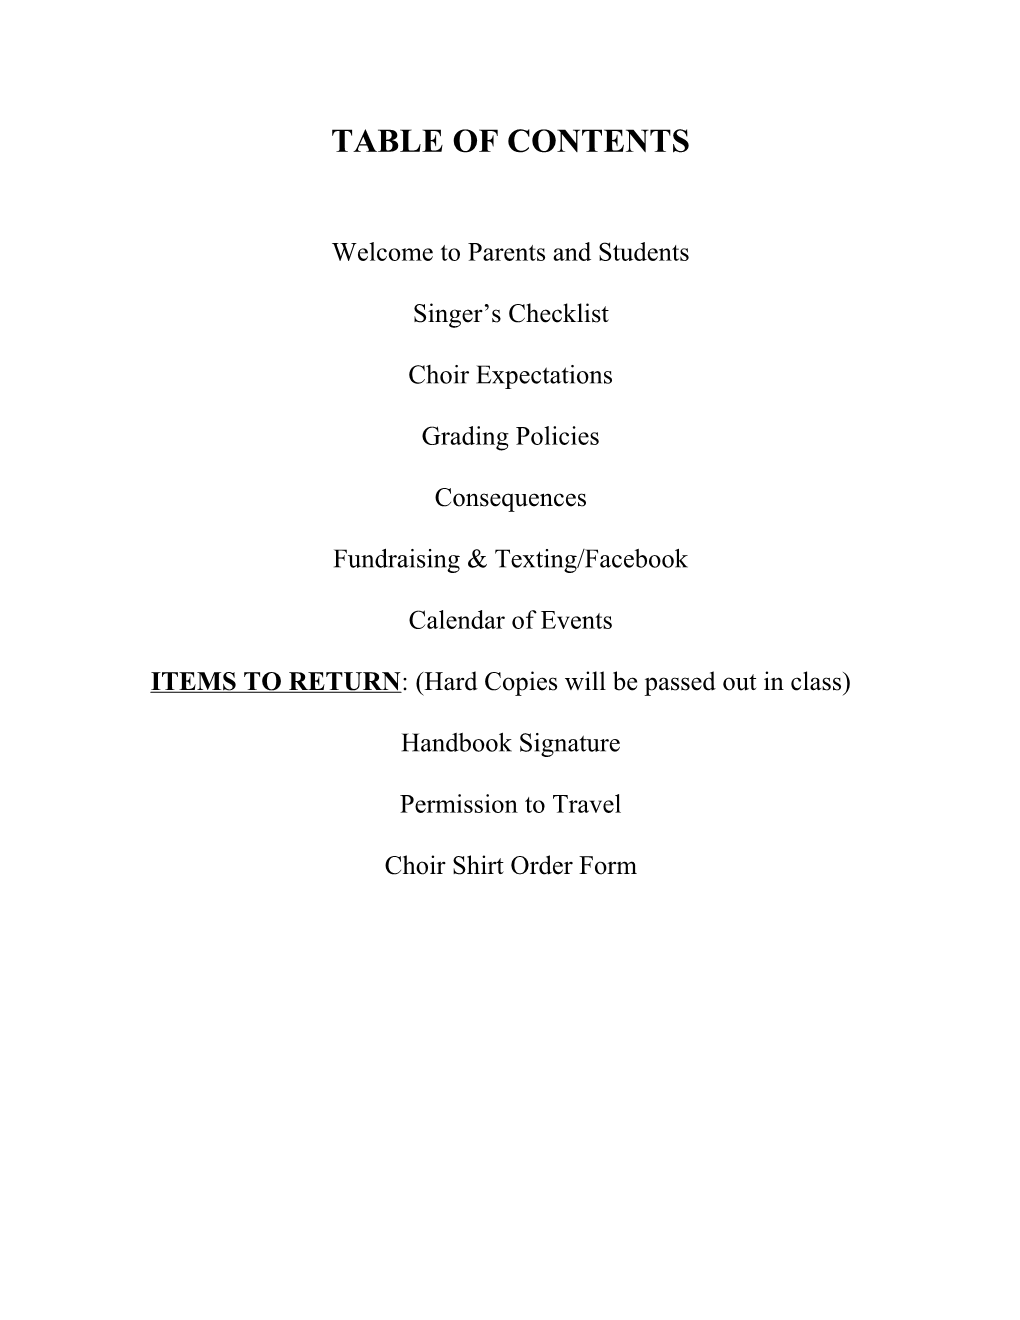 Table of Contents s501